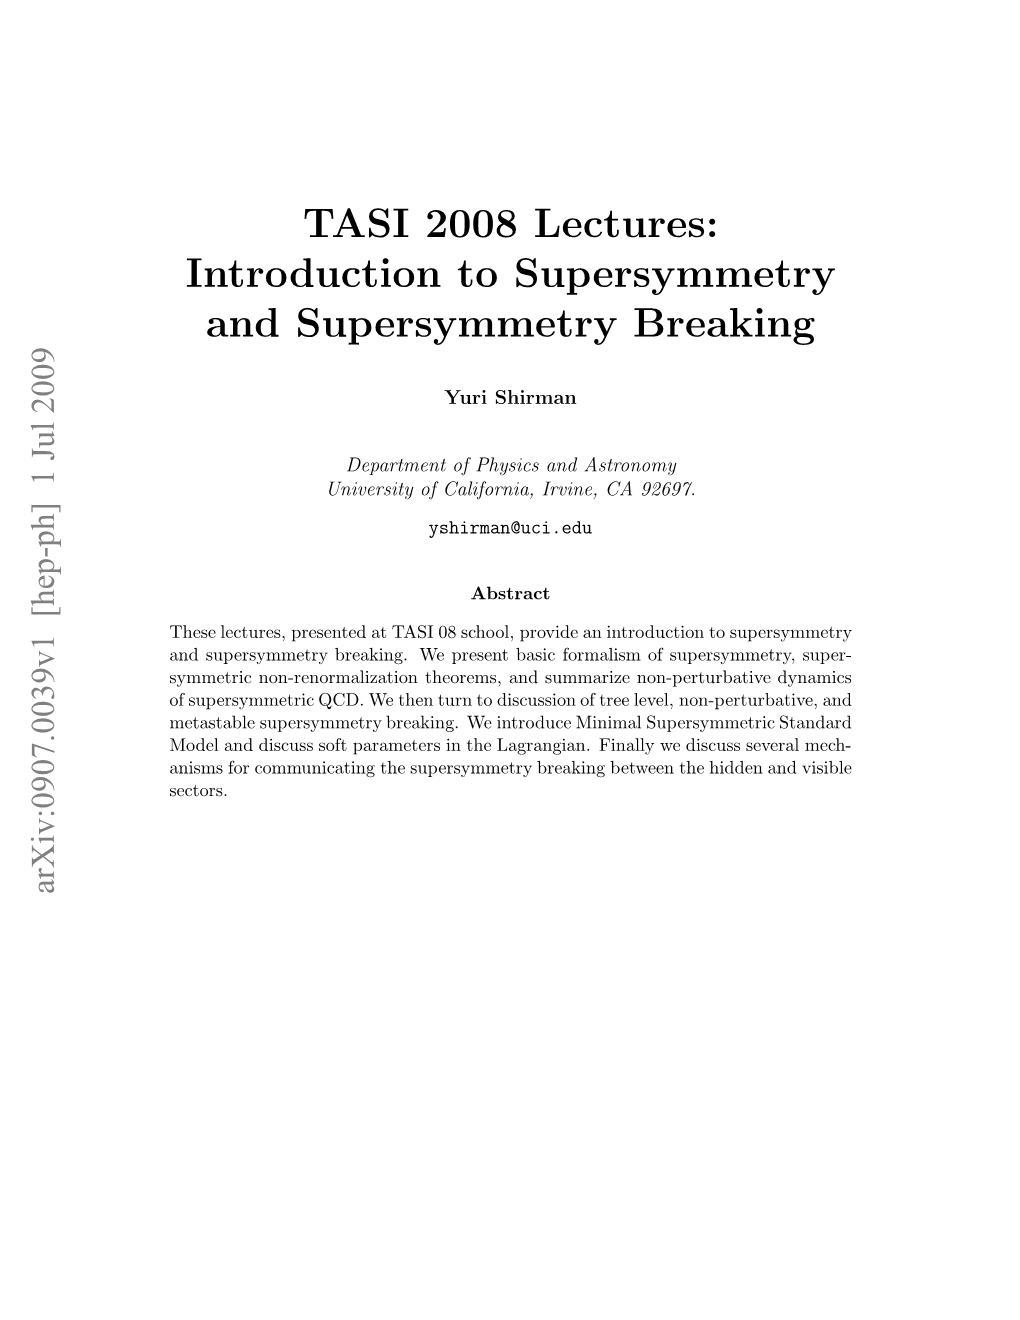 TASI 2008 Lectures: Introduction to Supersymmetry And